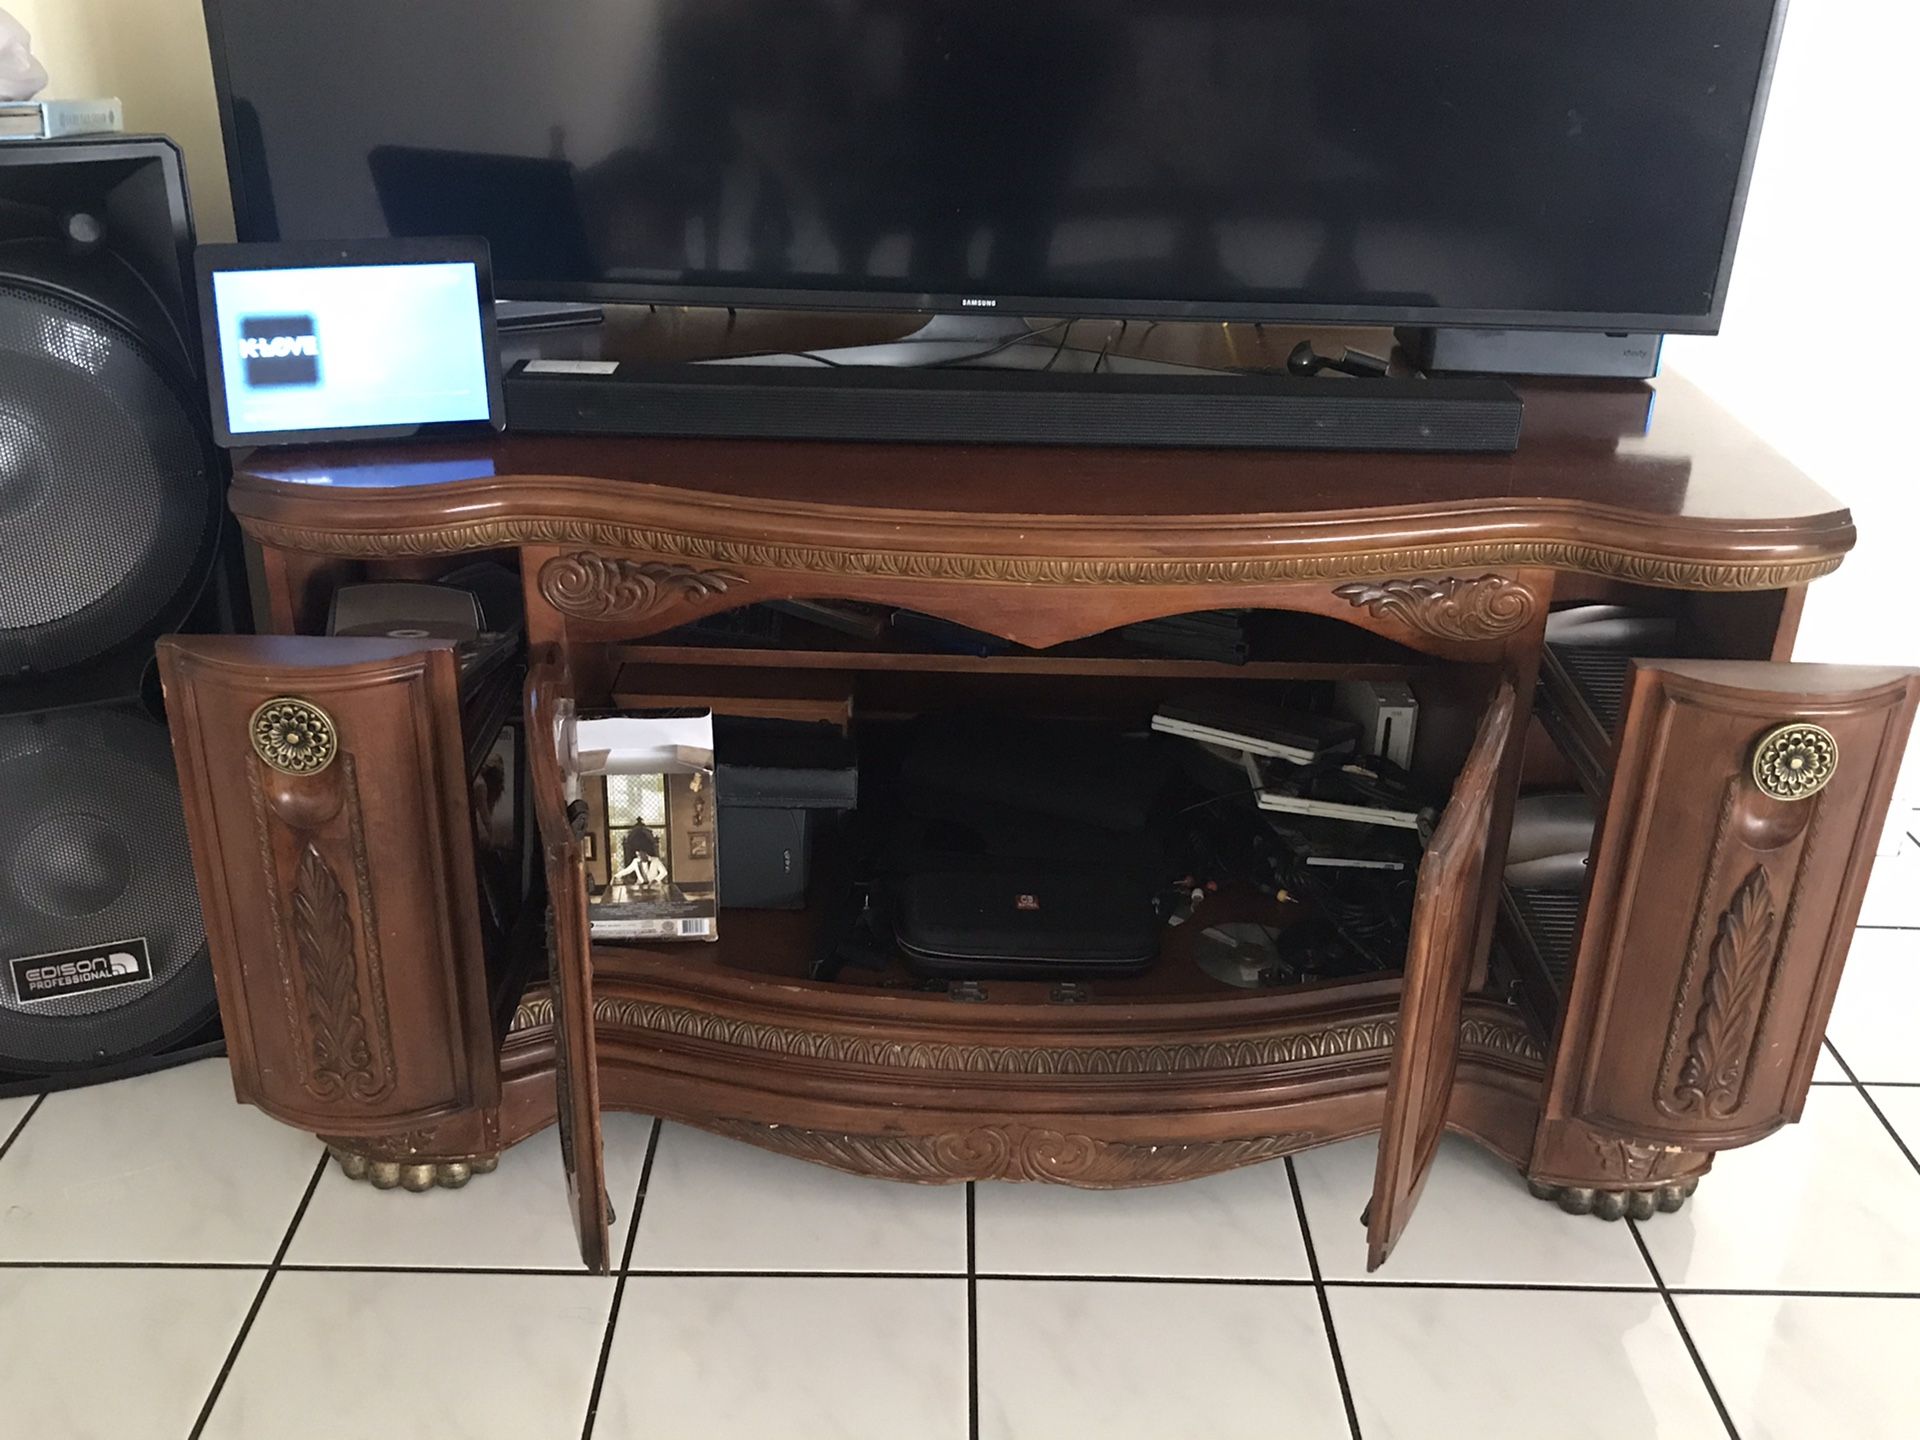 Beautiful TV console from El Dorado and Dining table only Very well taken care off!